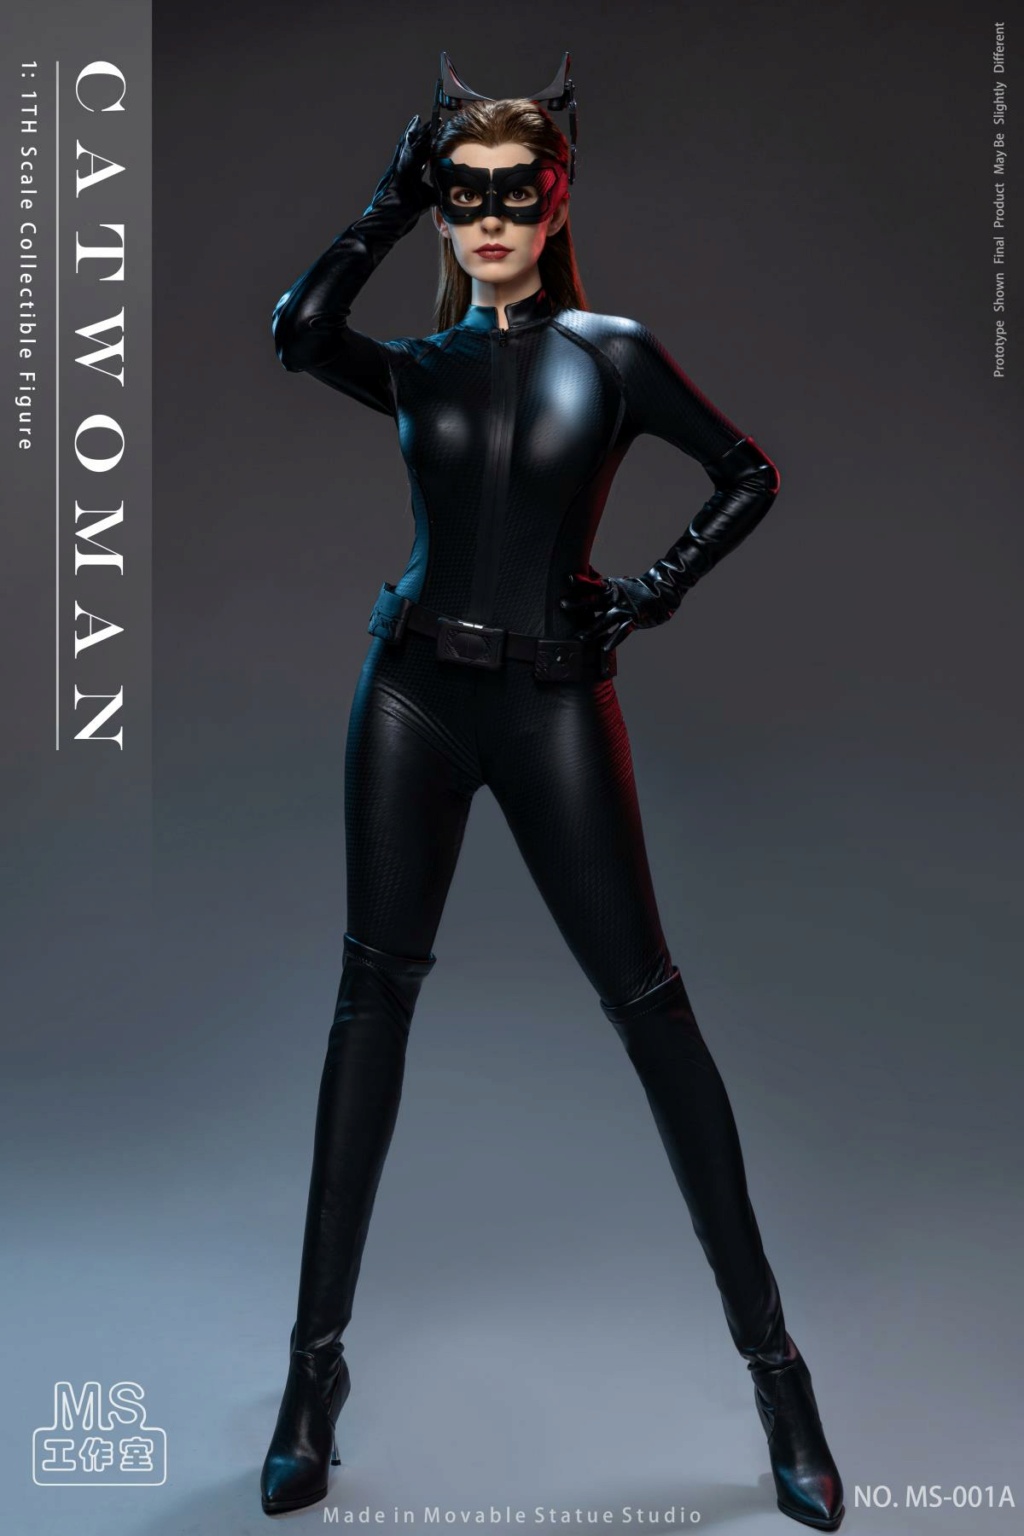 NEW PRODUCT: MS Studio: Catwoman Movie Version 1/1 Proportion Catwoman Cherished Movable Figure “ Grand ” Age MS-001A 16142